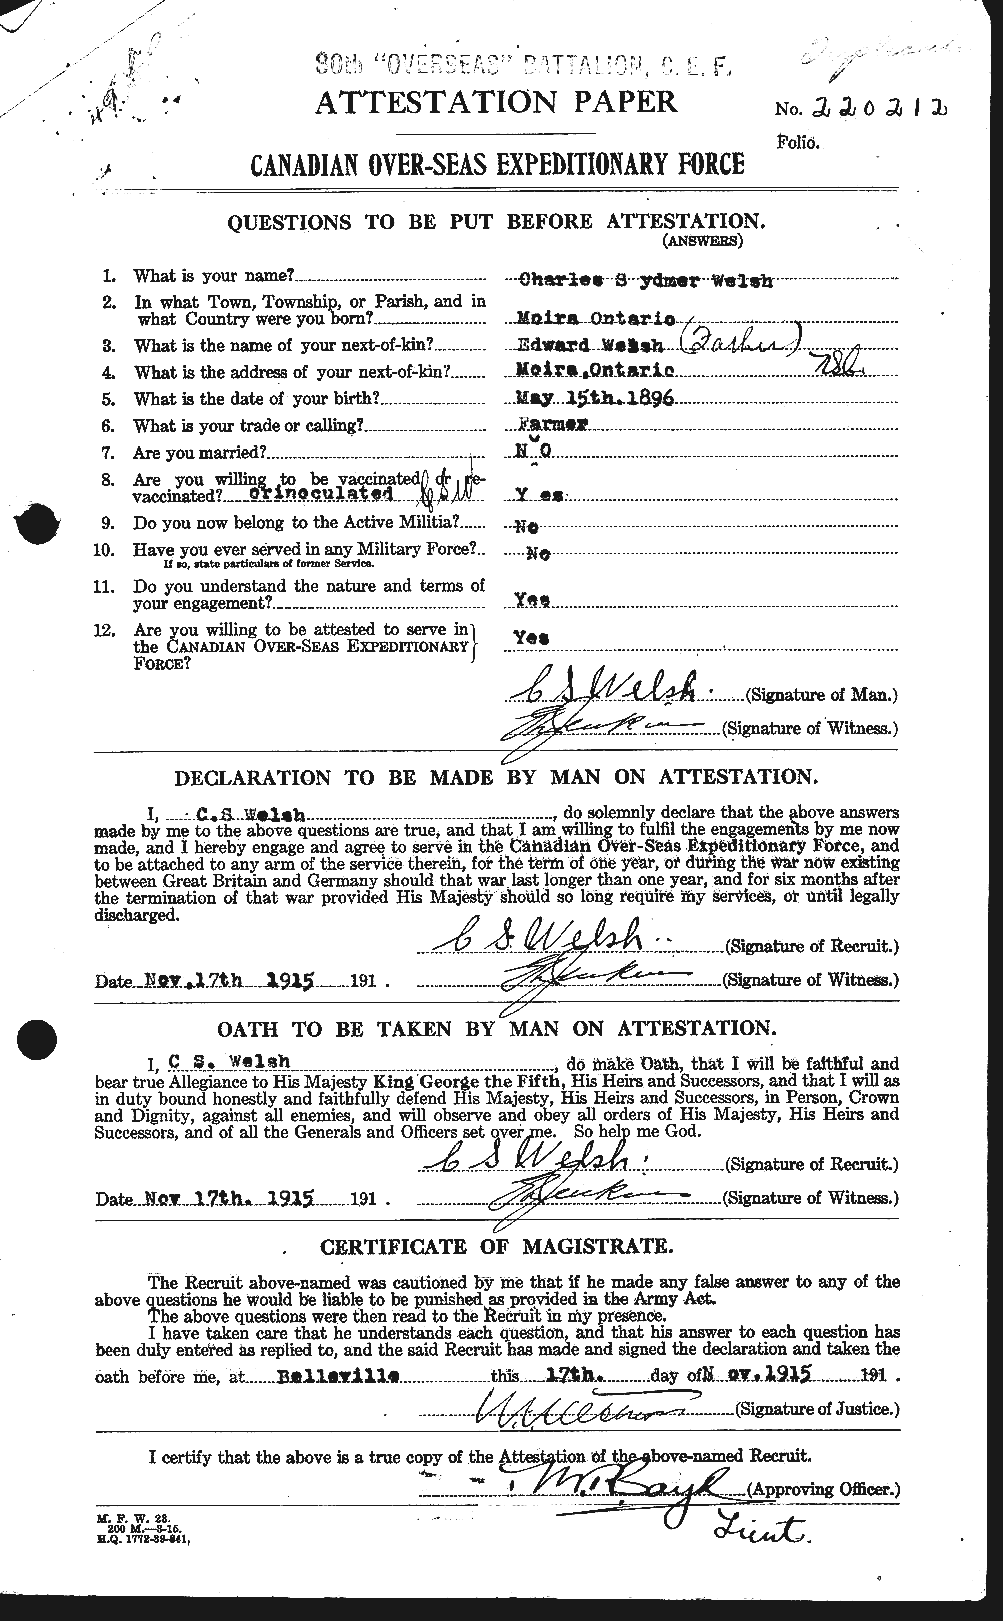 Personnel Records of the First World War - CEF 665438a